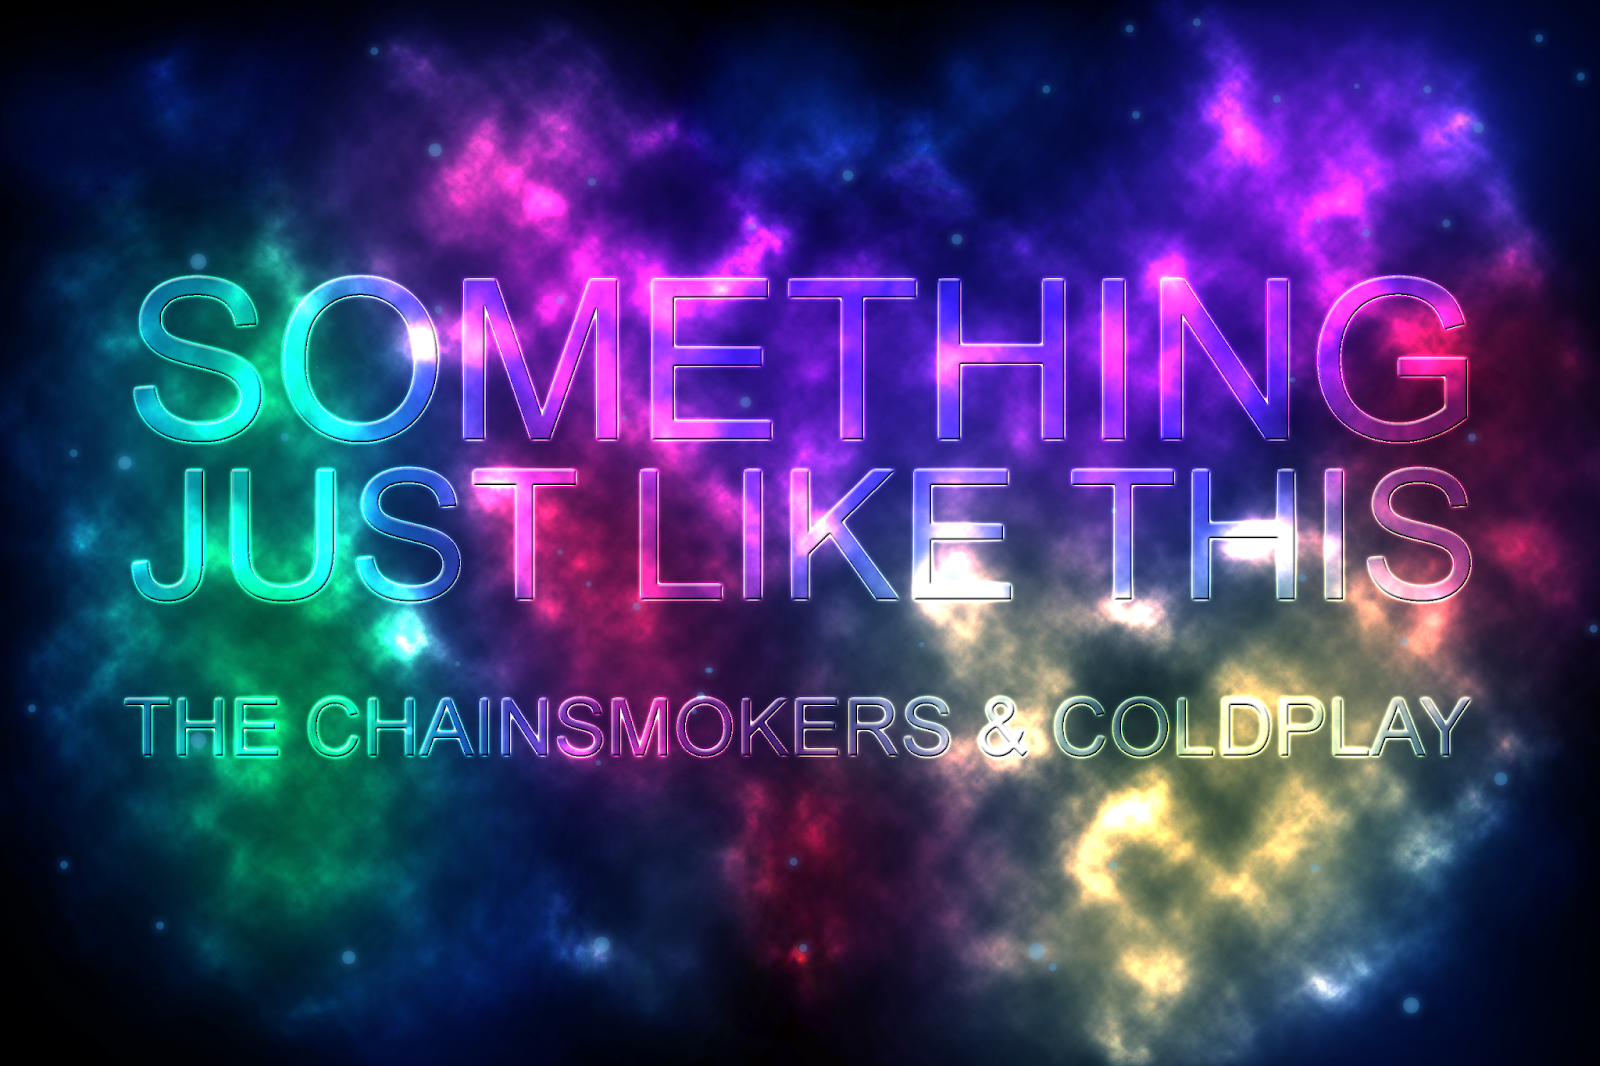 The chainsmokers coldplay something. The Chainsmokers Coldplay. Coldplay & the Chainsmokers солист. The Chainsmokers Coldplay something just like this. The Chainsmokers something just like this Lyrics.